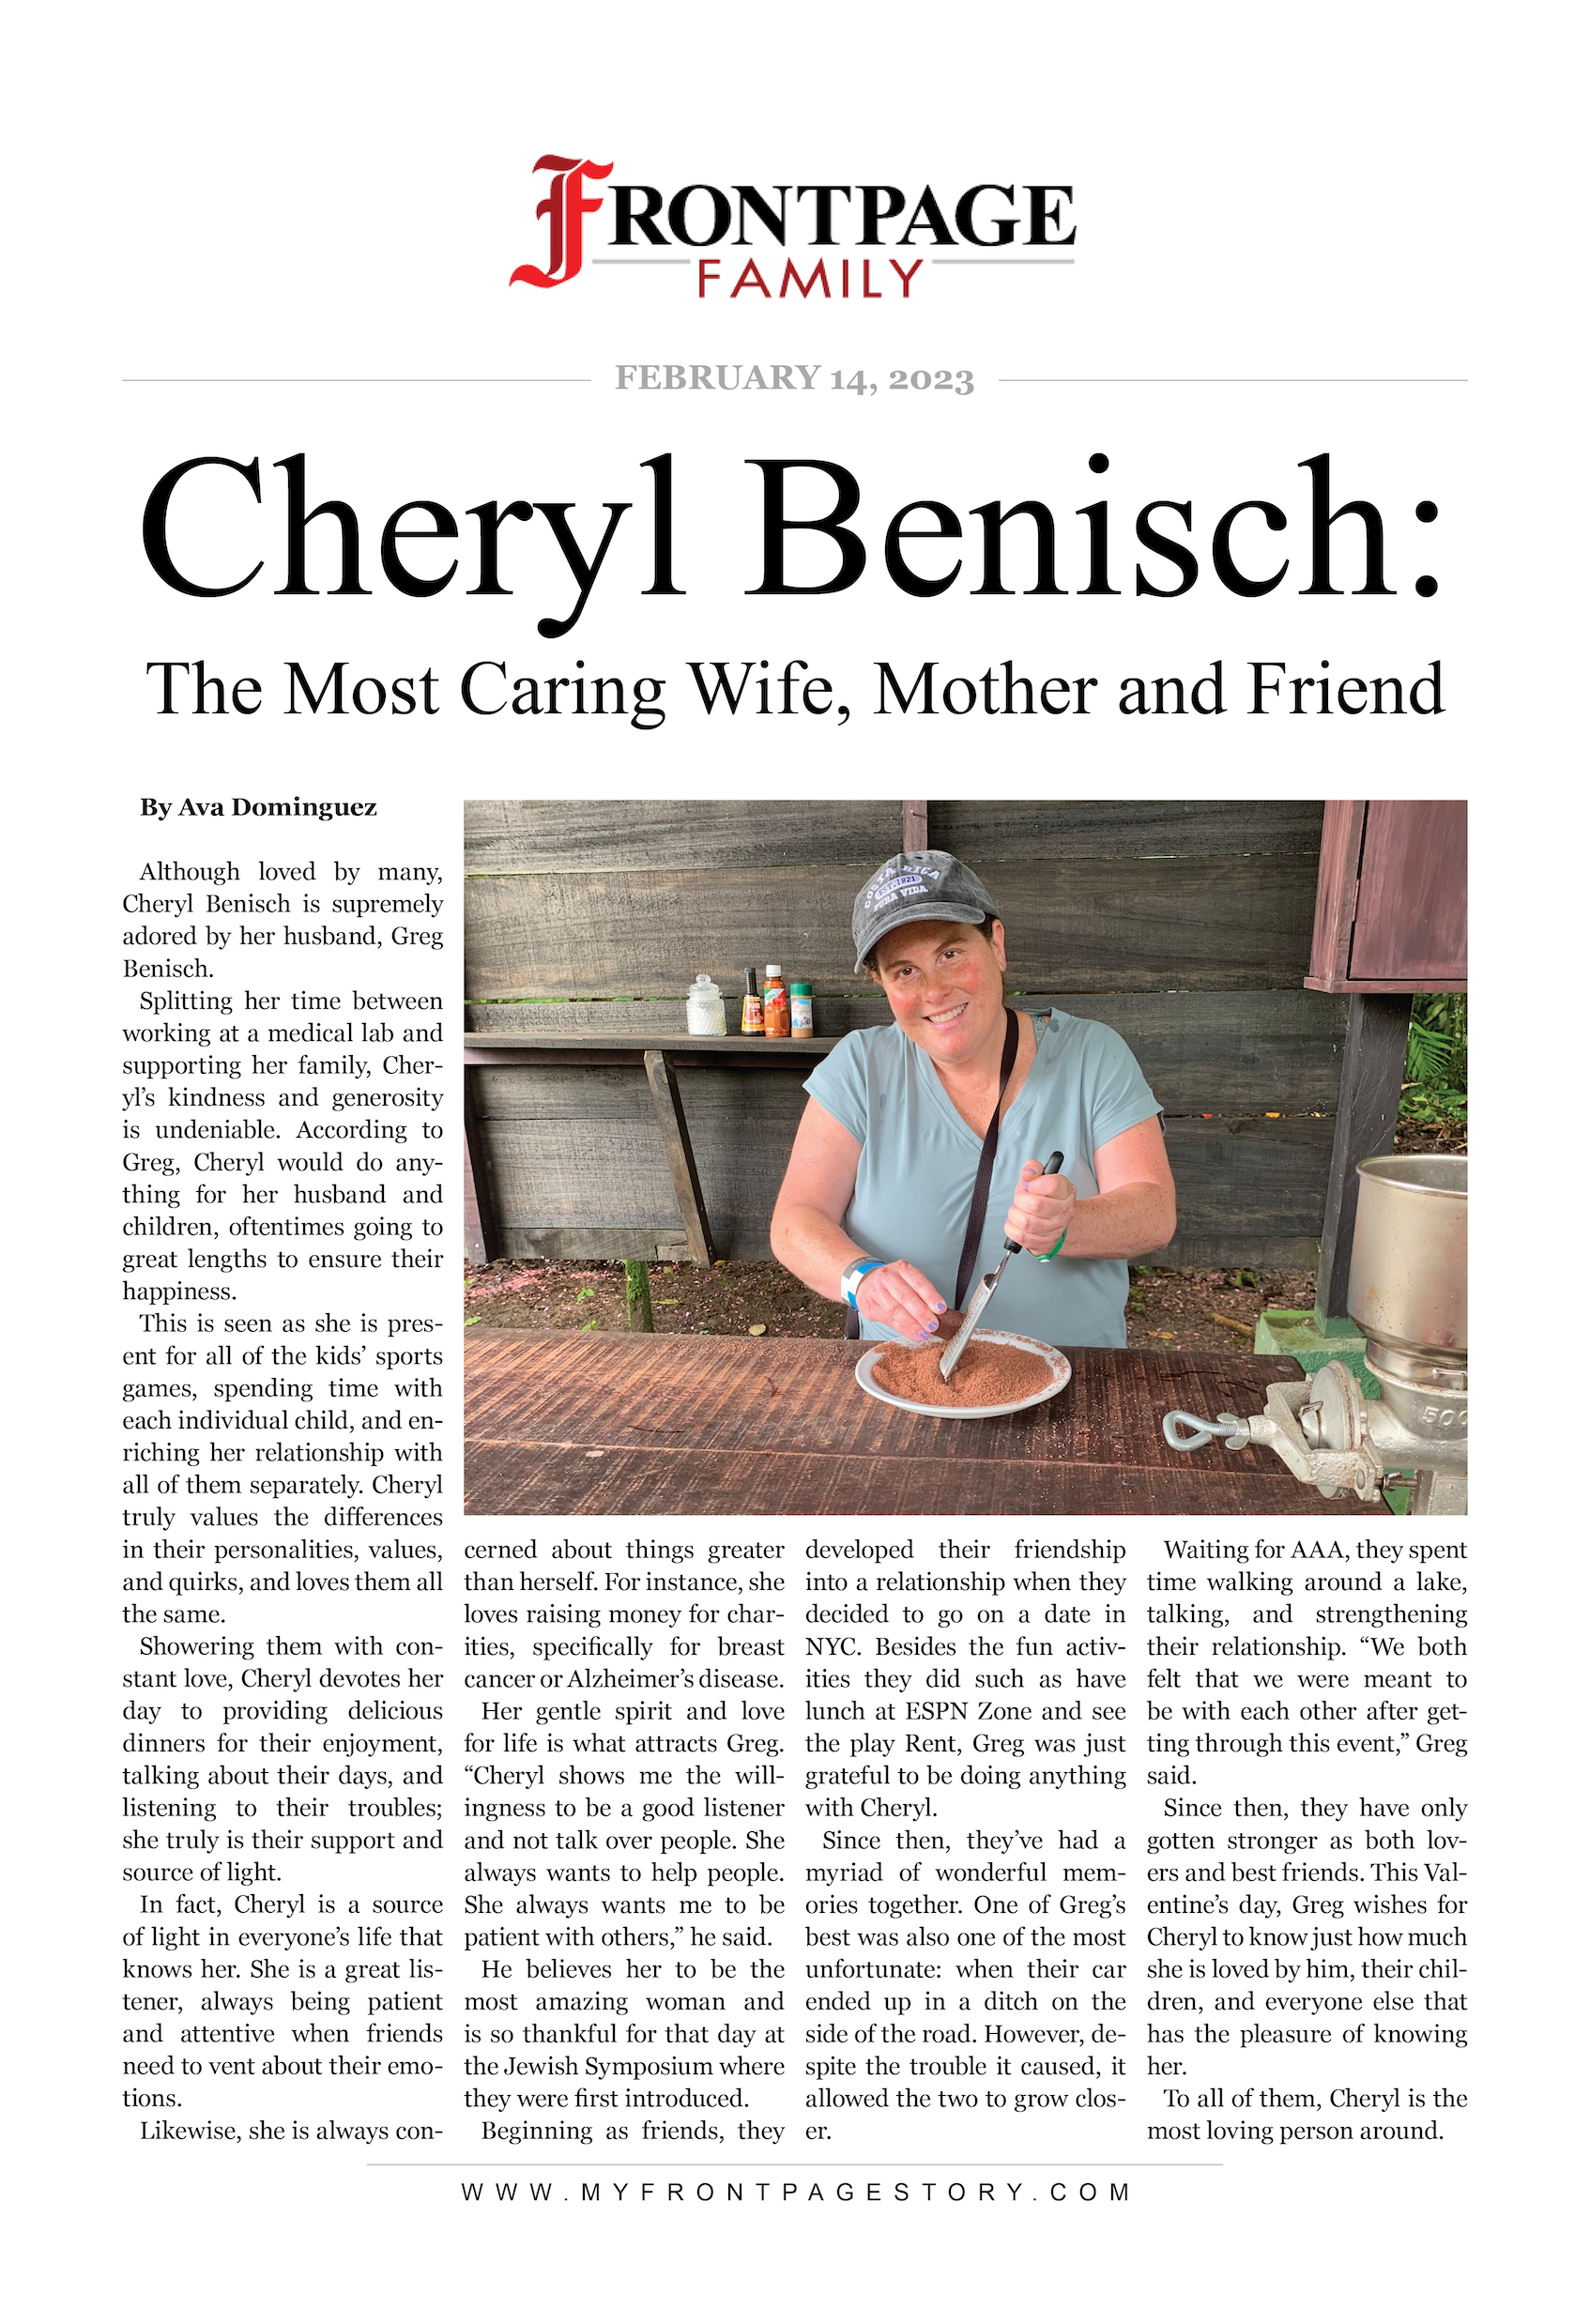 Cheryl Benisch: The Most Caring Wife, Mother and Friend